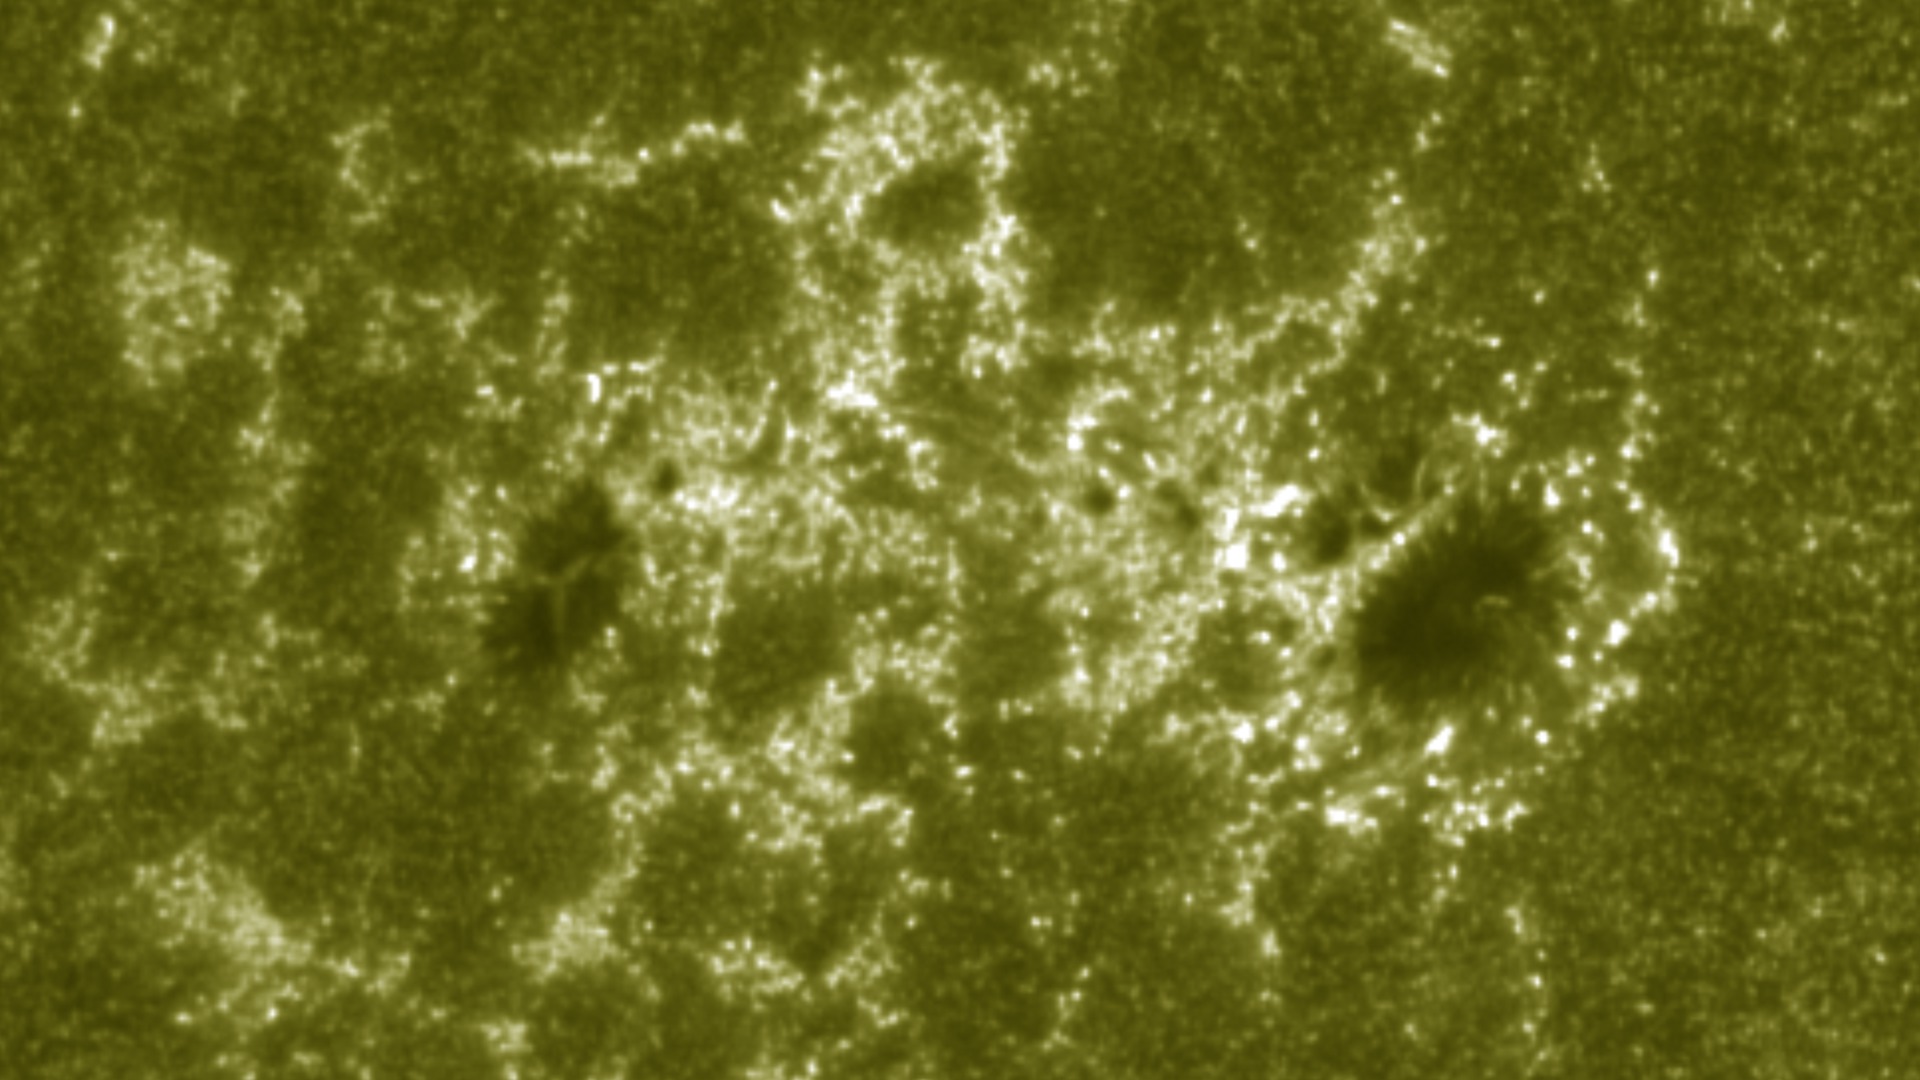 This movie zooms into the region of the Sun imaged by IRIS.